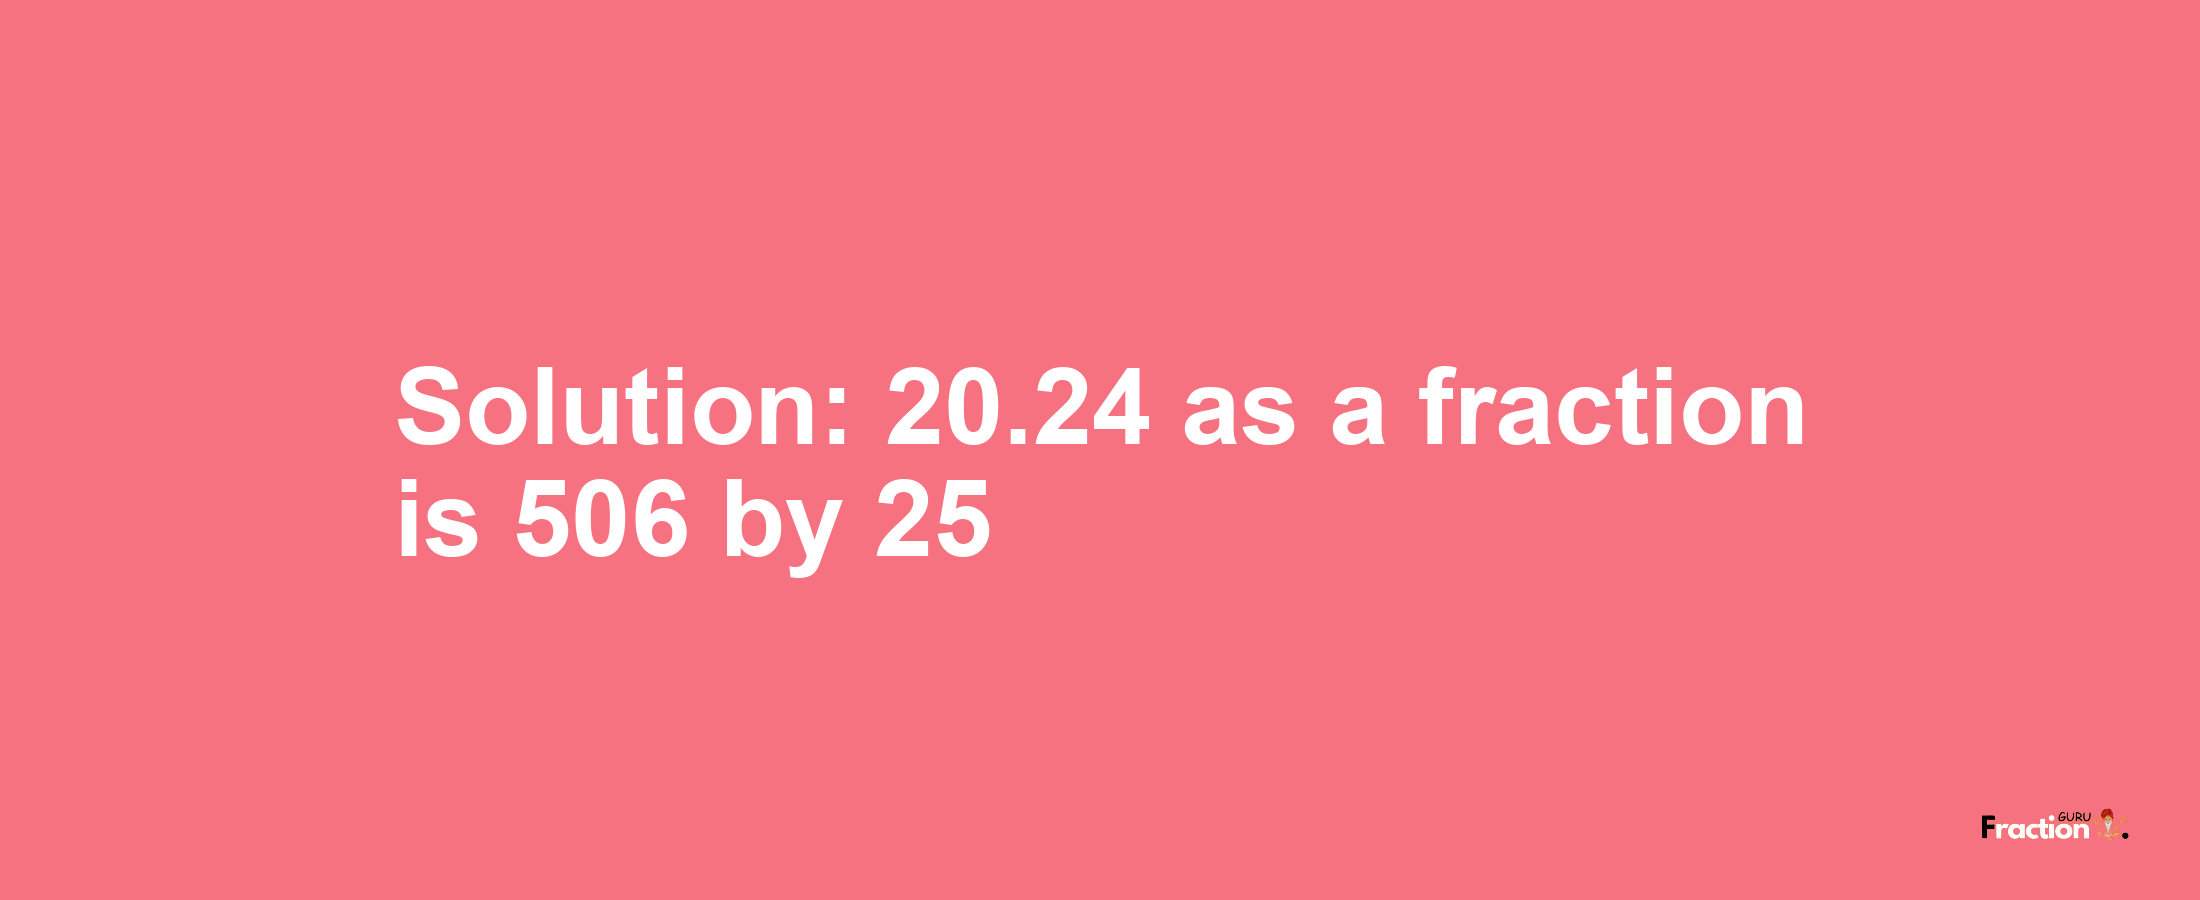 Solution:20.24 as a fraction is 506/25